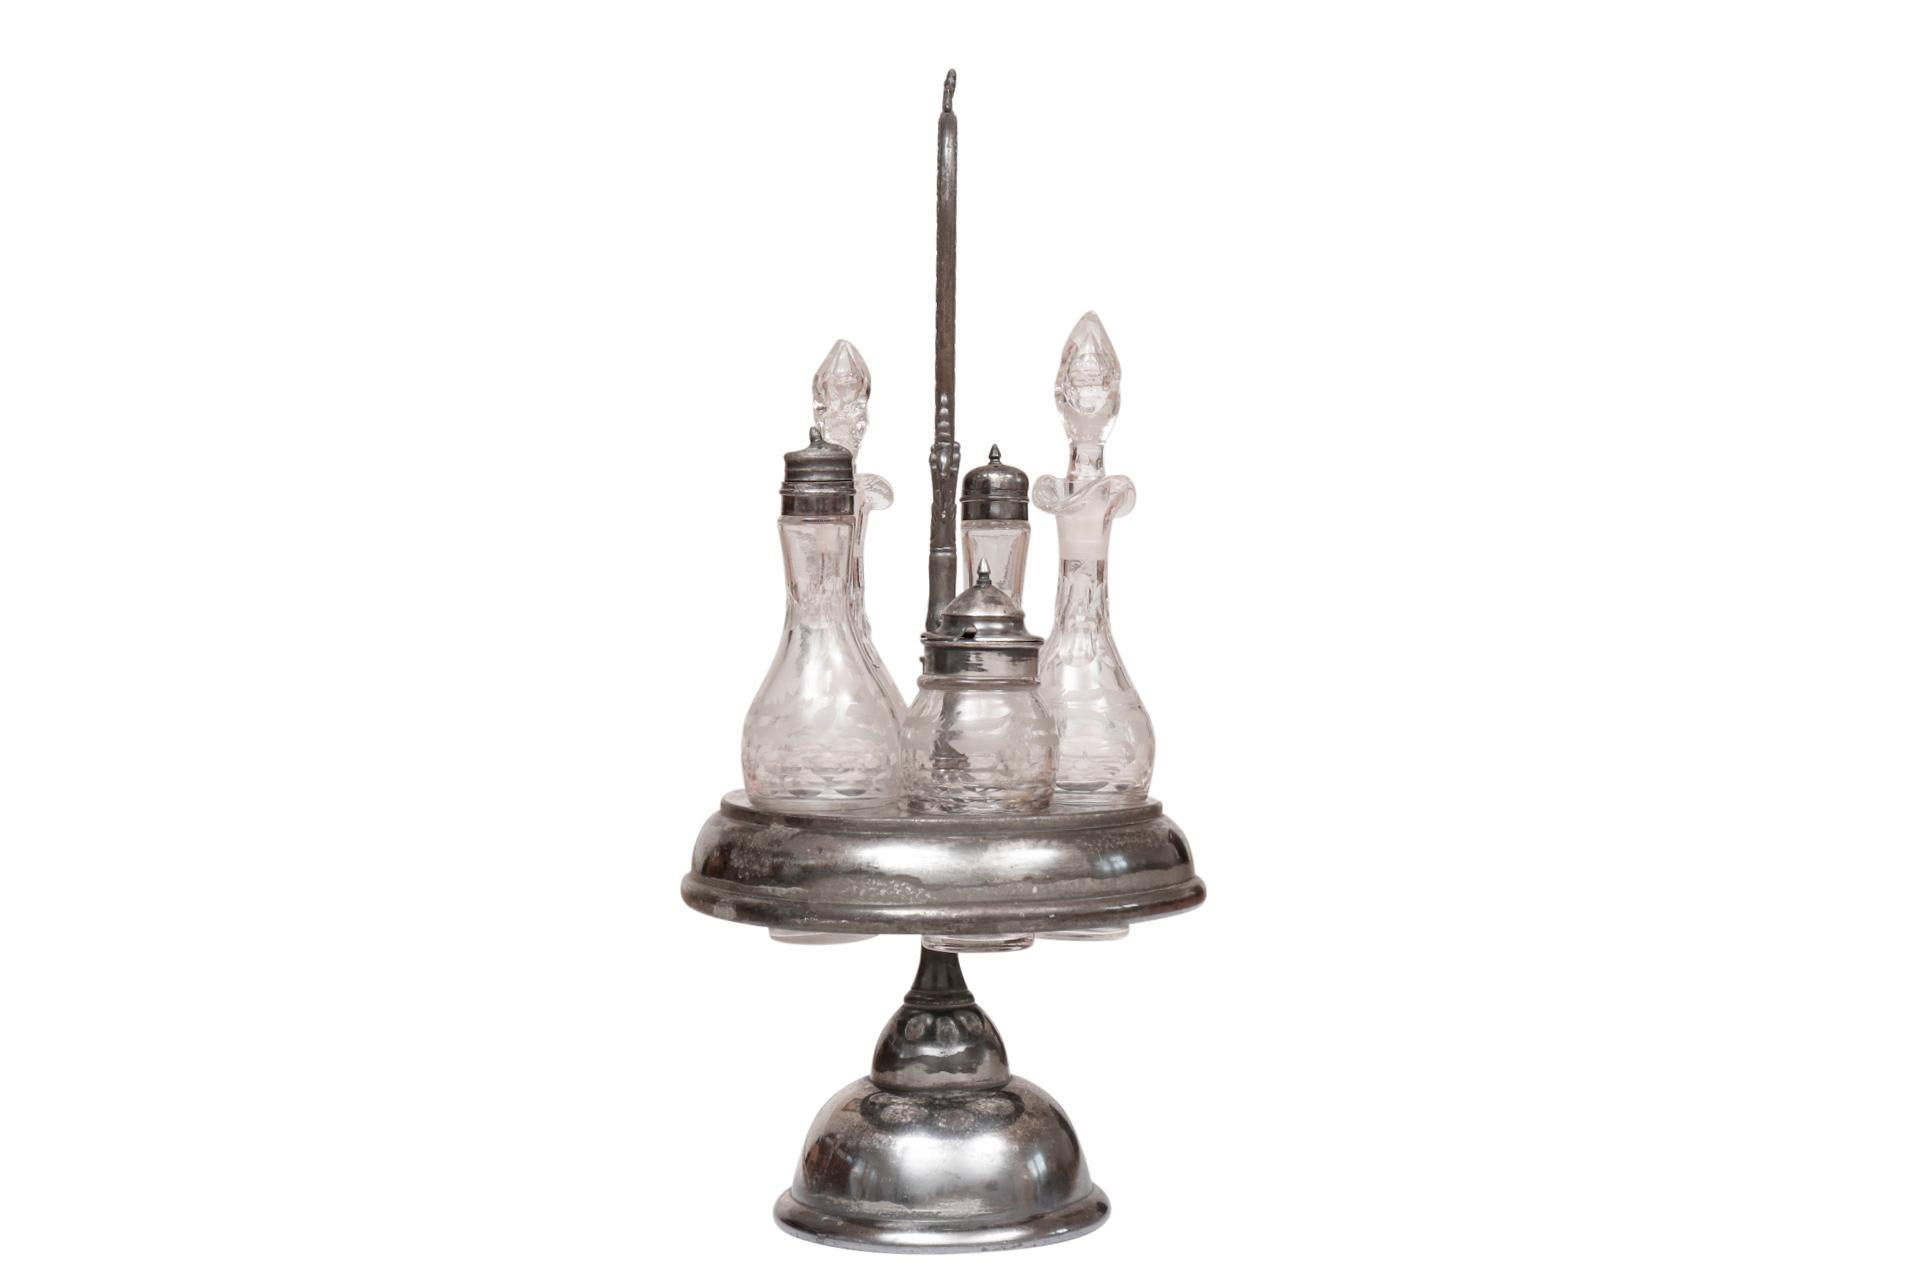 A silver plated cruet condiment set. Five etched glass bottles serve to hold salt, pepper, oil, vinegar and soy sauce. The caddy rotates and a single handle is ornately pressed with reeded lines and a simple floral motif.